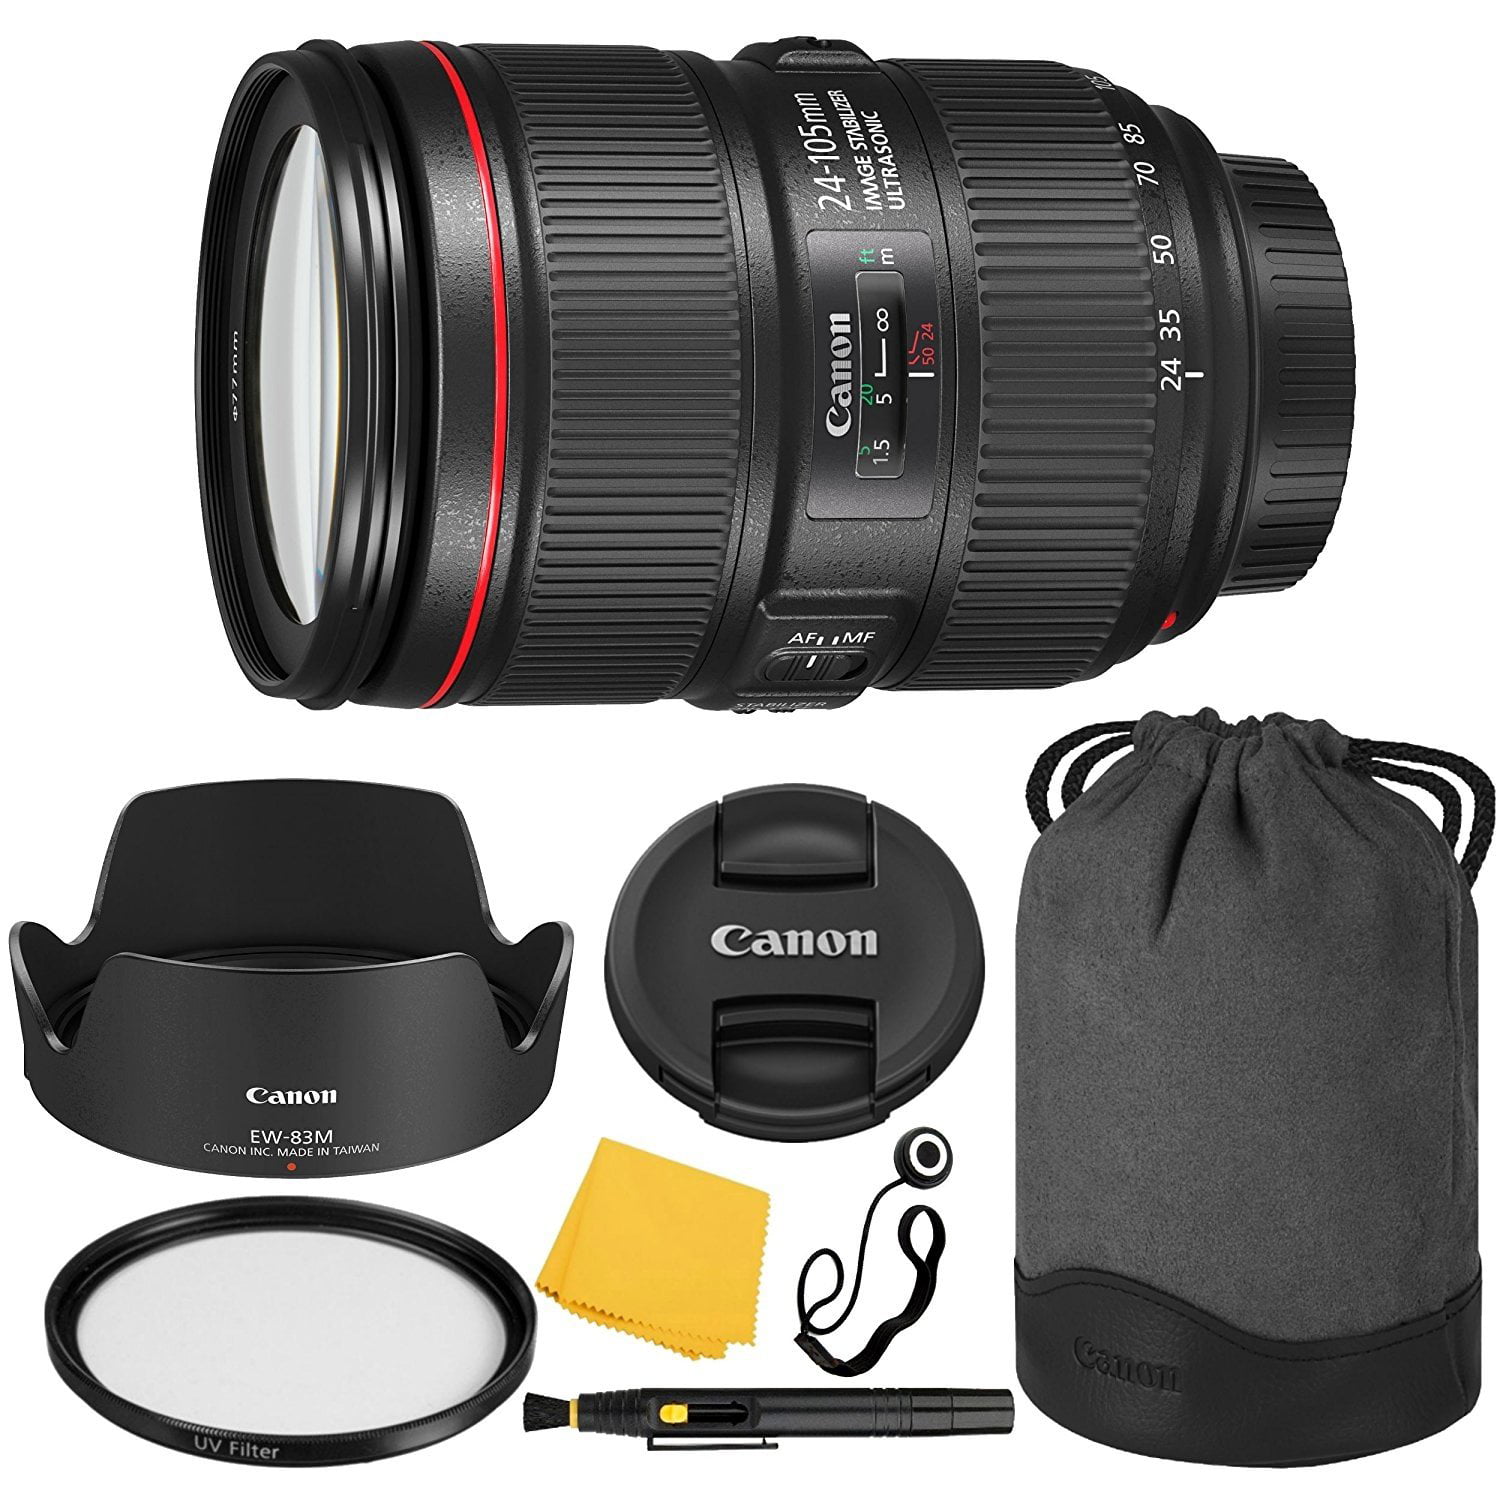 Canon EF 24–105mm f/4L IS II USM Lens + UV Filter + Collapsible Rubber Lens  Hood + Lens Cleaning Pen + Lens Cap Keeper + Cleaning Cloth - 24-105mm II 